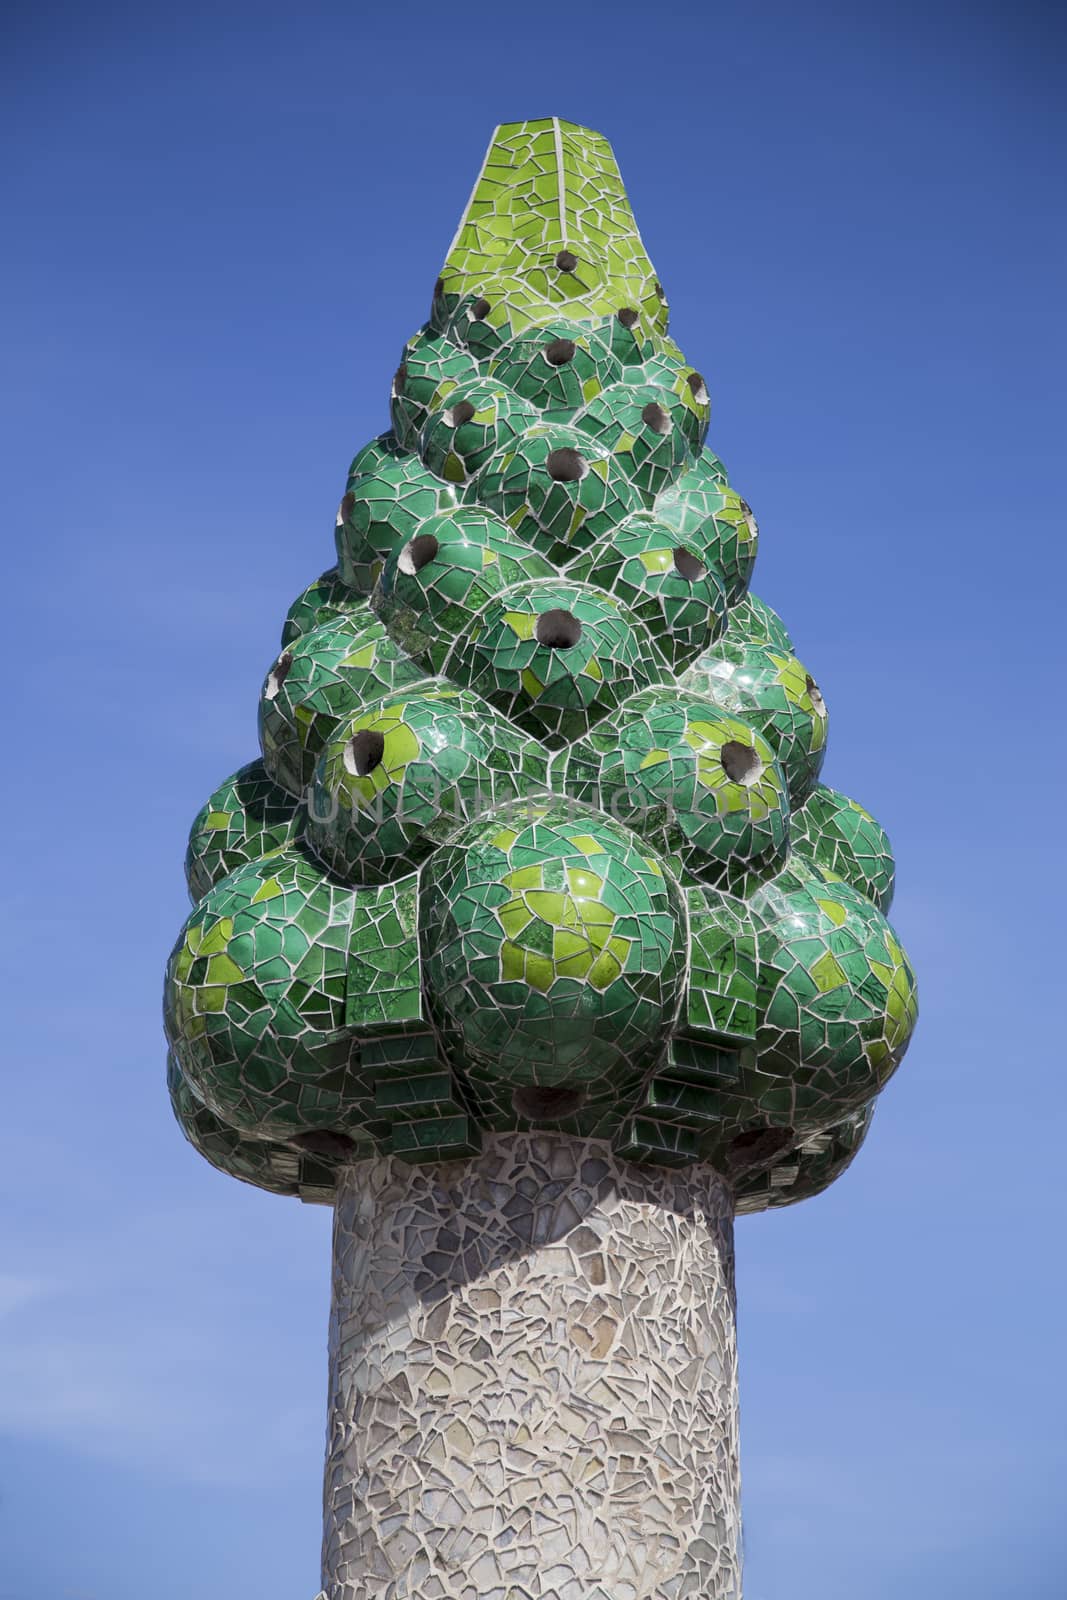 Barcelona, Spain - September 25, 2015: Gaudi Chimney, Palau Guell, Gaudi broken tile mosacis and strange decorated chimneys are evident in his early work at Palau Guell.